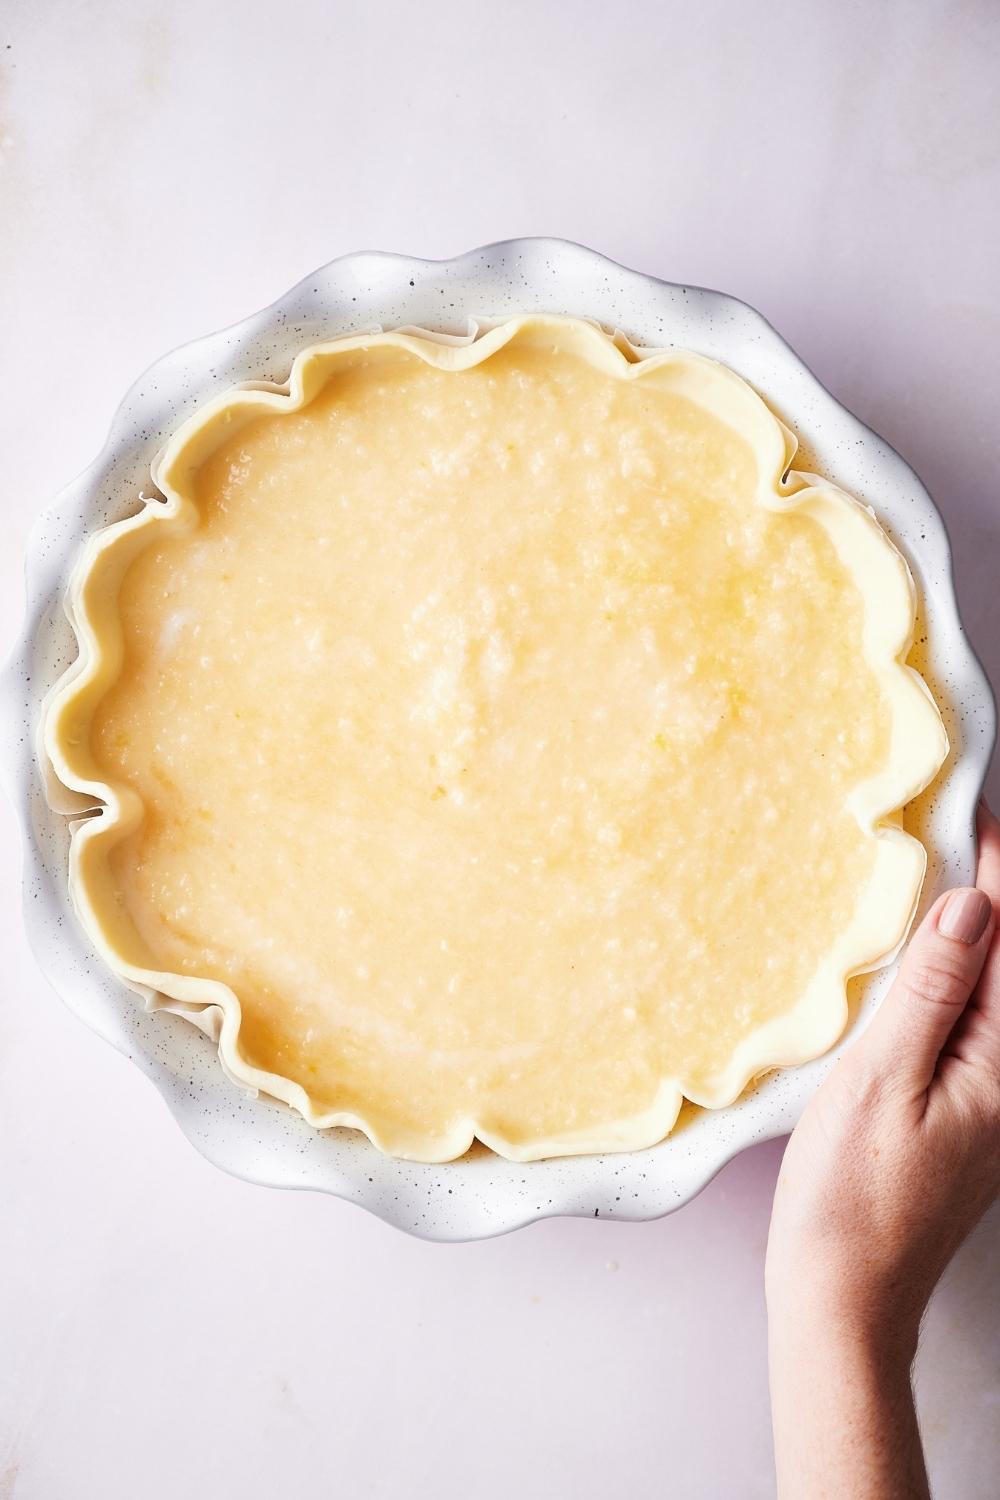 A pie dish with unbaked crust, the pie filling has been poured into it.